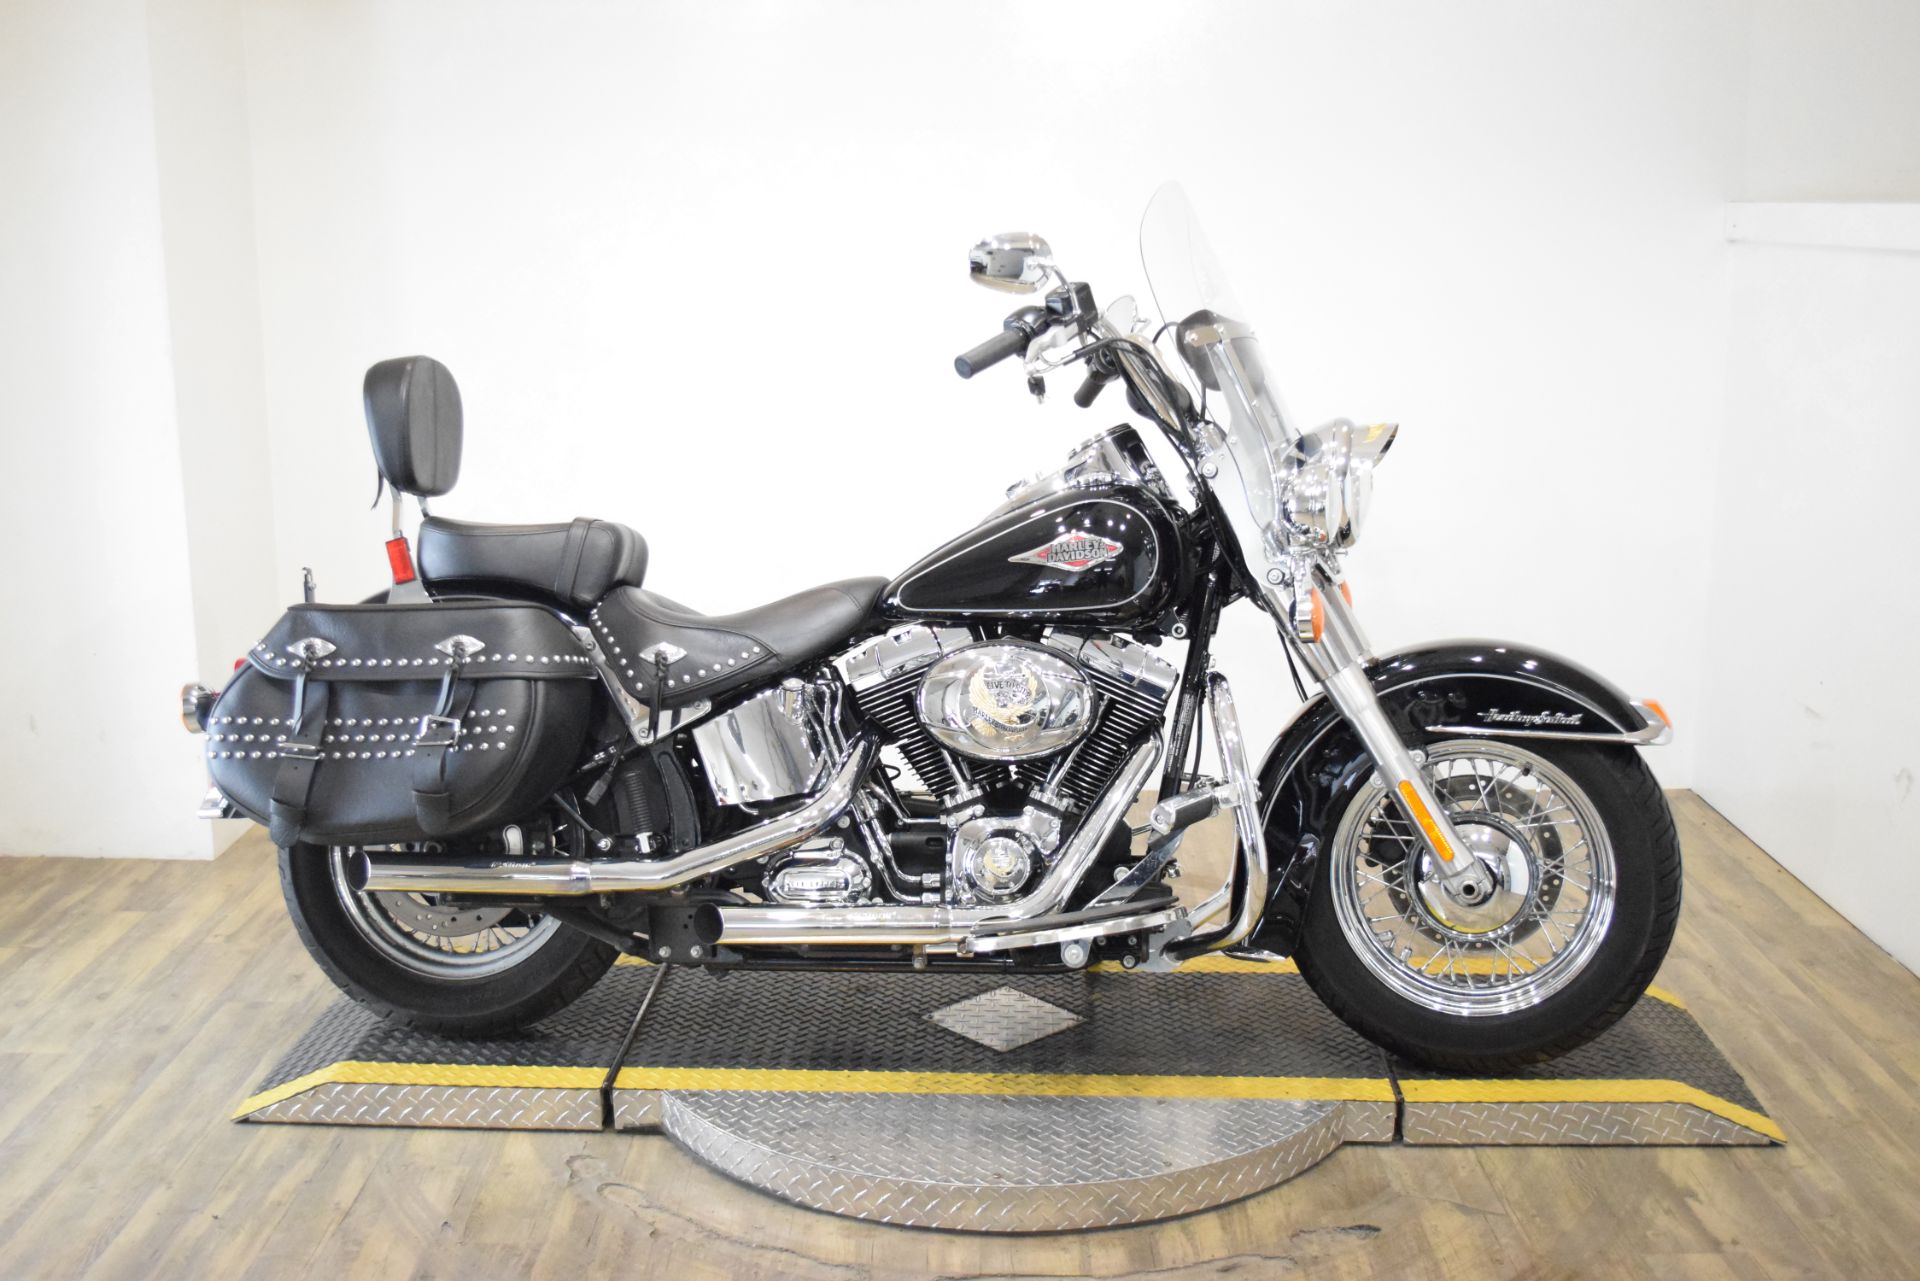 2013 Harley Davidson Heritage Softail Classic Used Motorcycle For Sale Wauconda Illinois